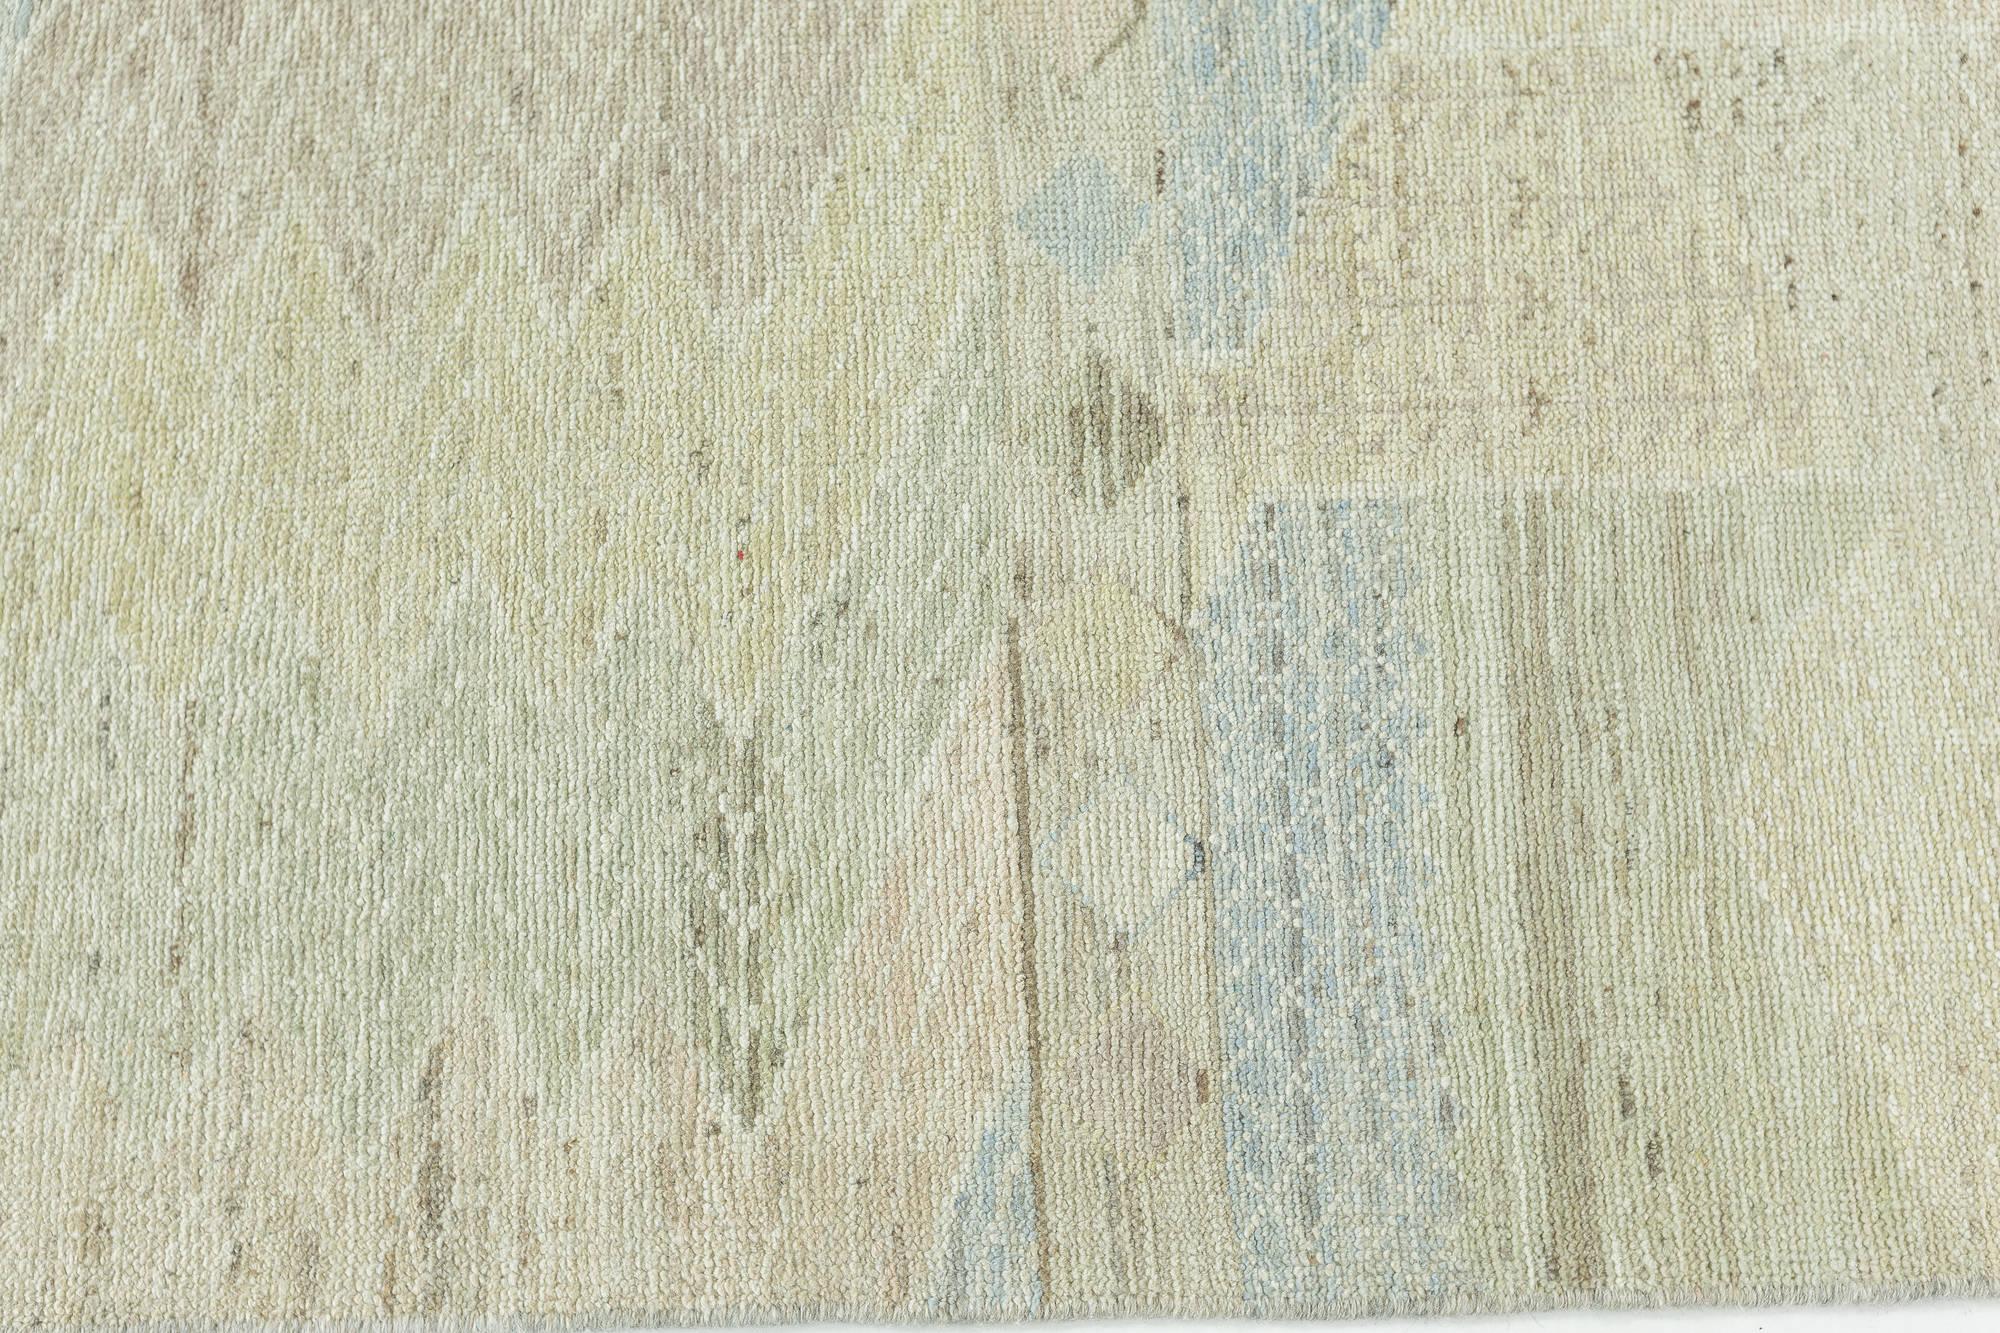 Countryside Textural Light Blue, Beige Handmade Wool Rug by Doris Leslie Blau In New Condition For Sale In New York, NY